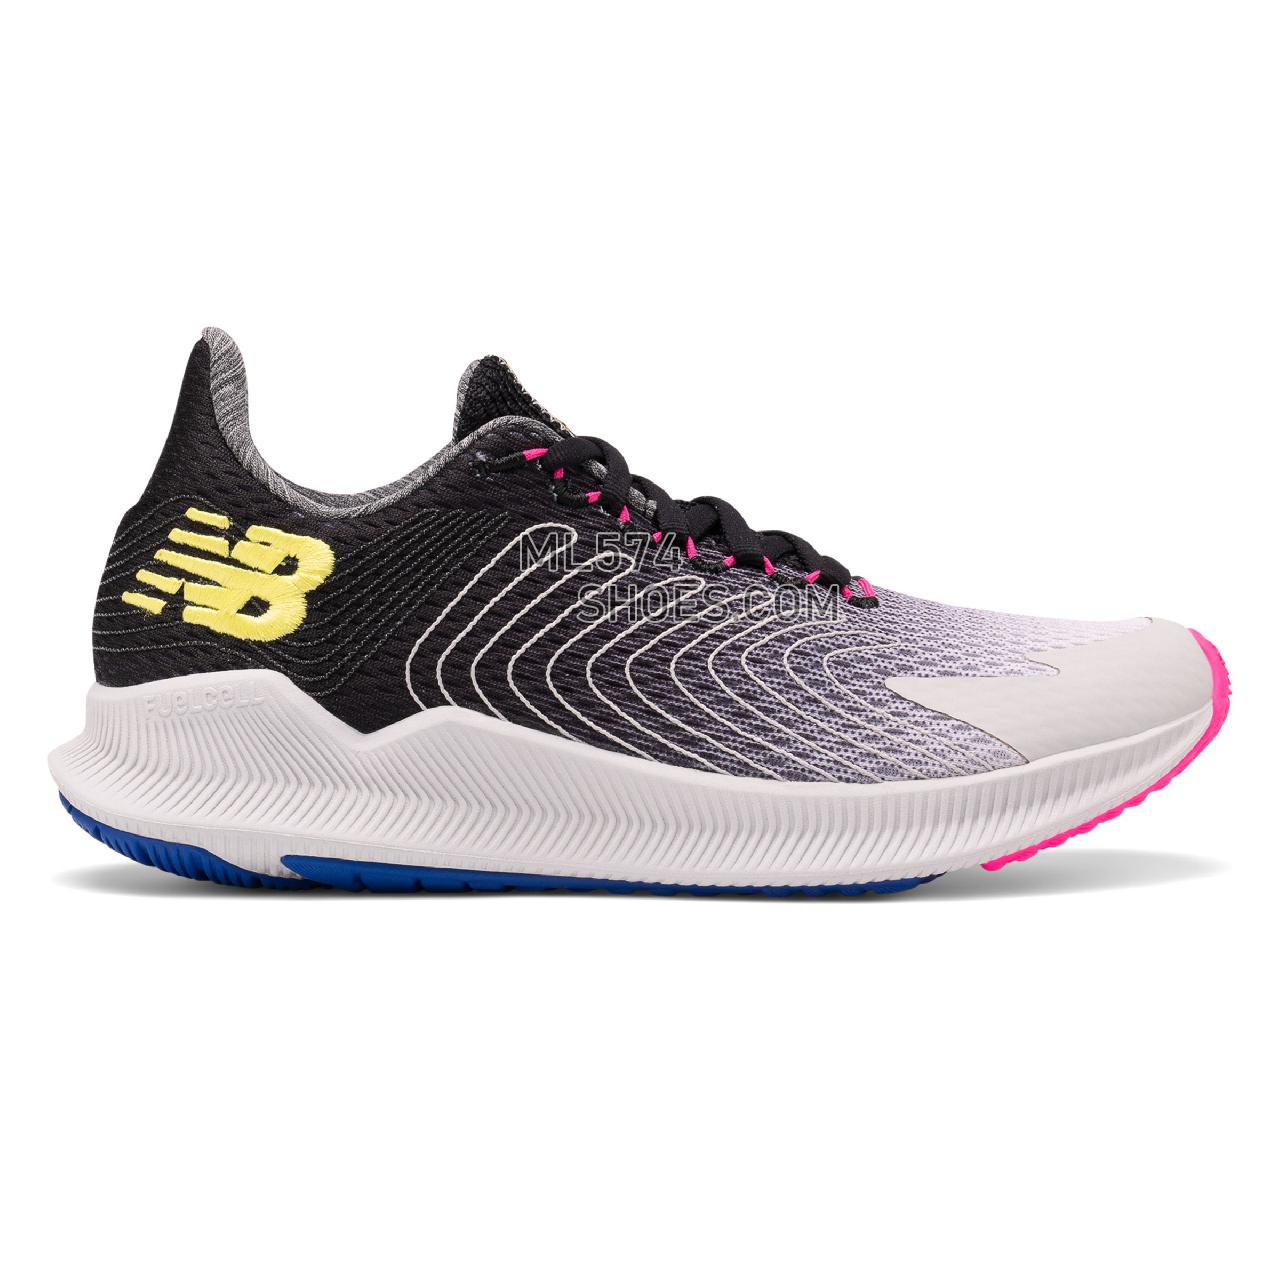 New Balance FuelCell Propel - Women's Neutral Running - Summer Fog with Black and Sulphur Yellow - WFCPRLF1